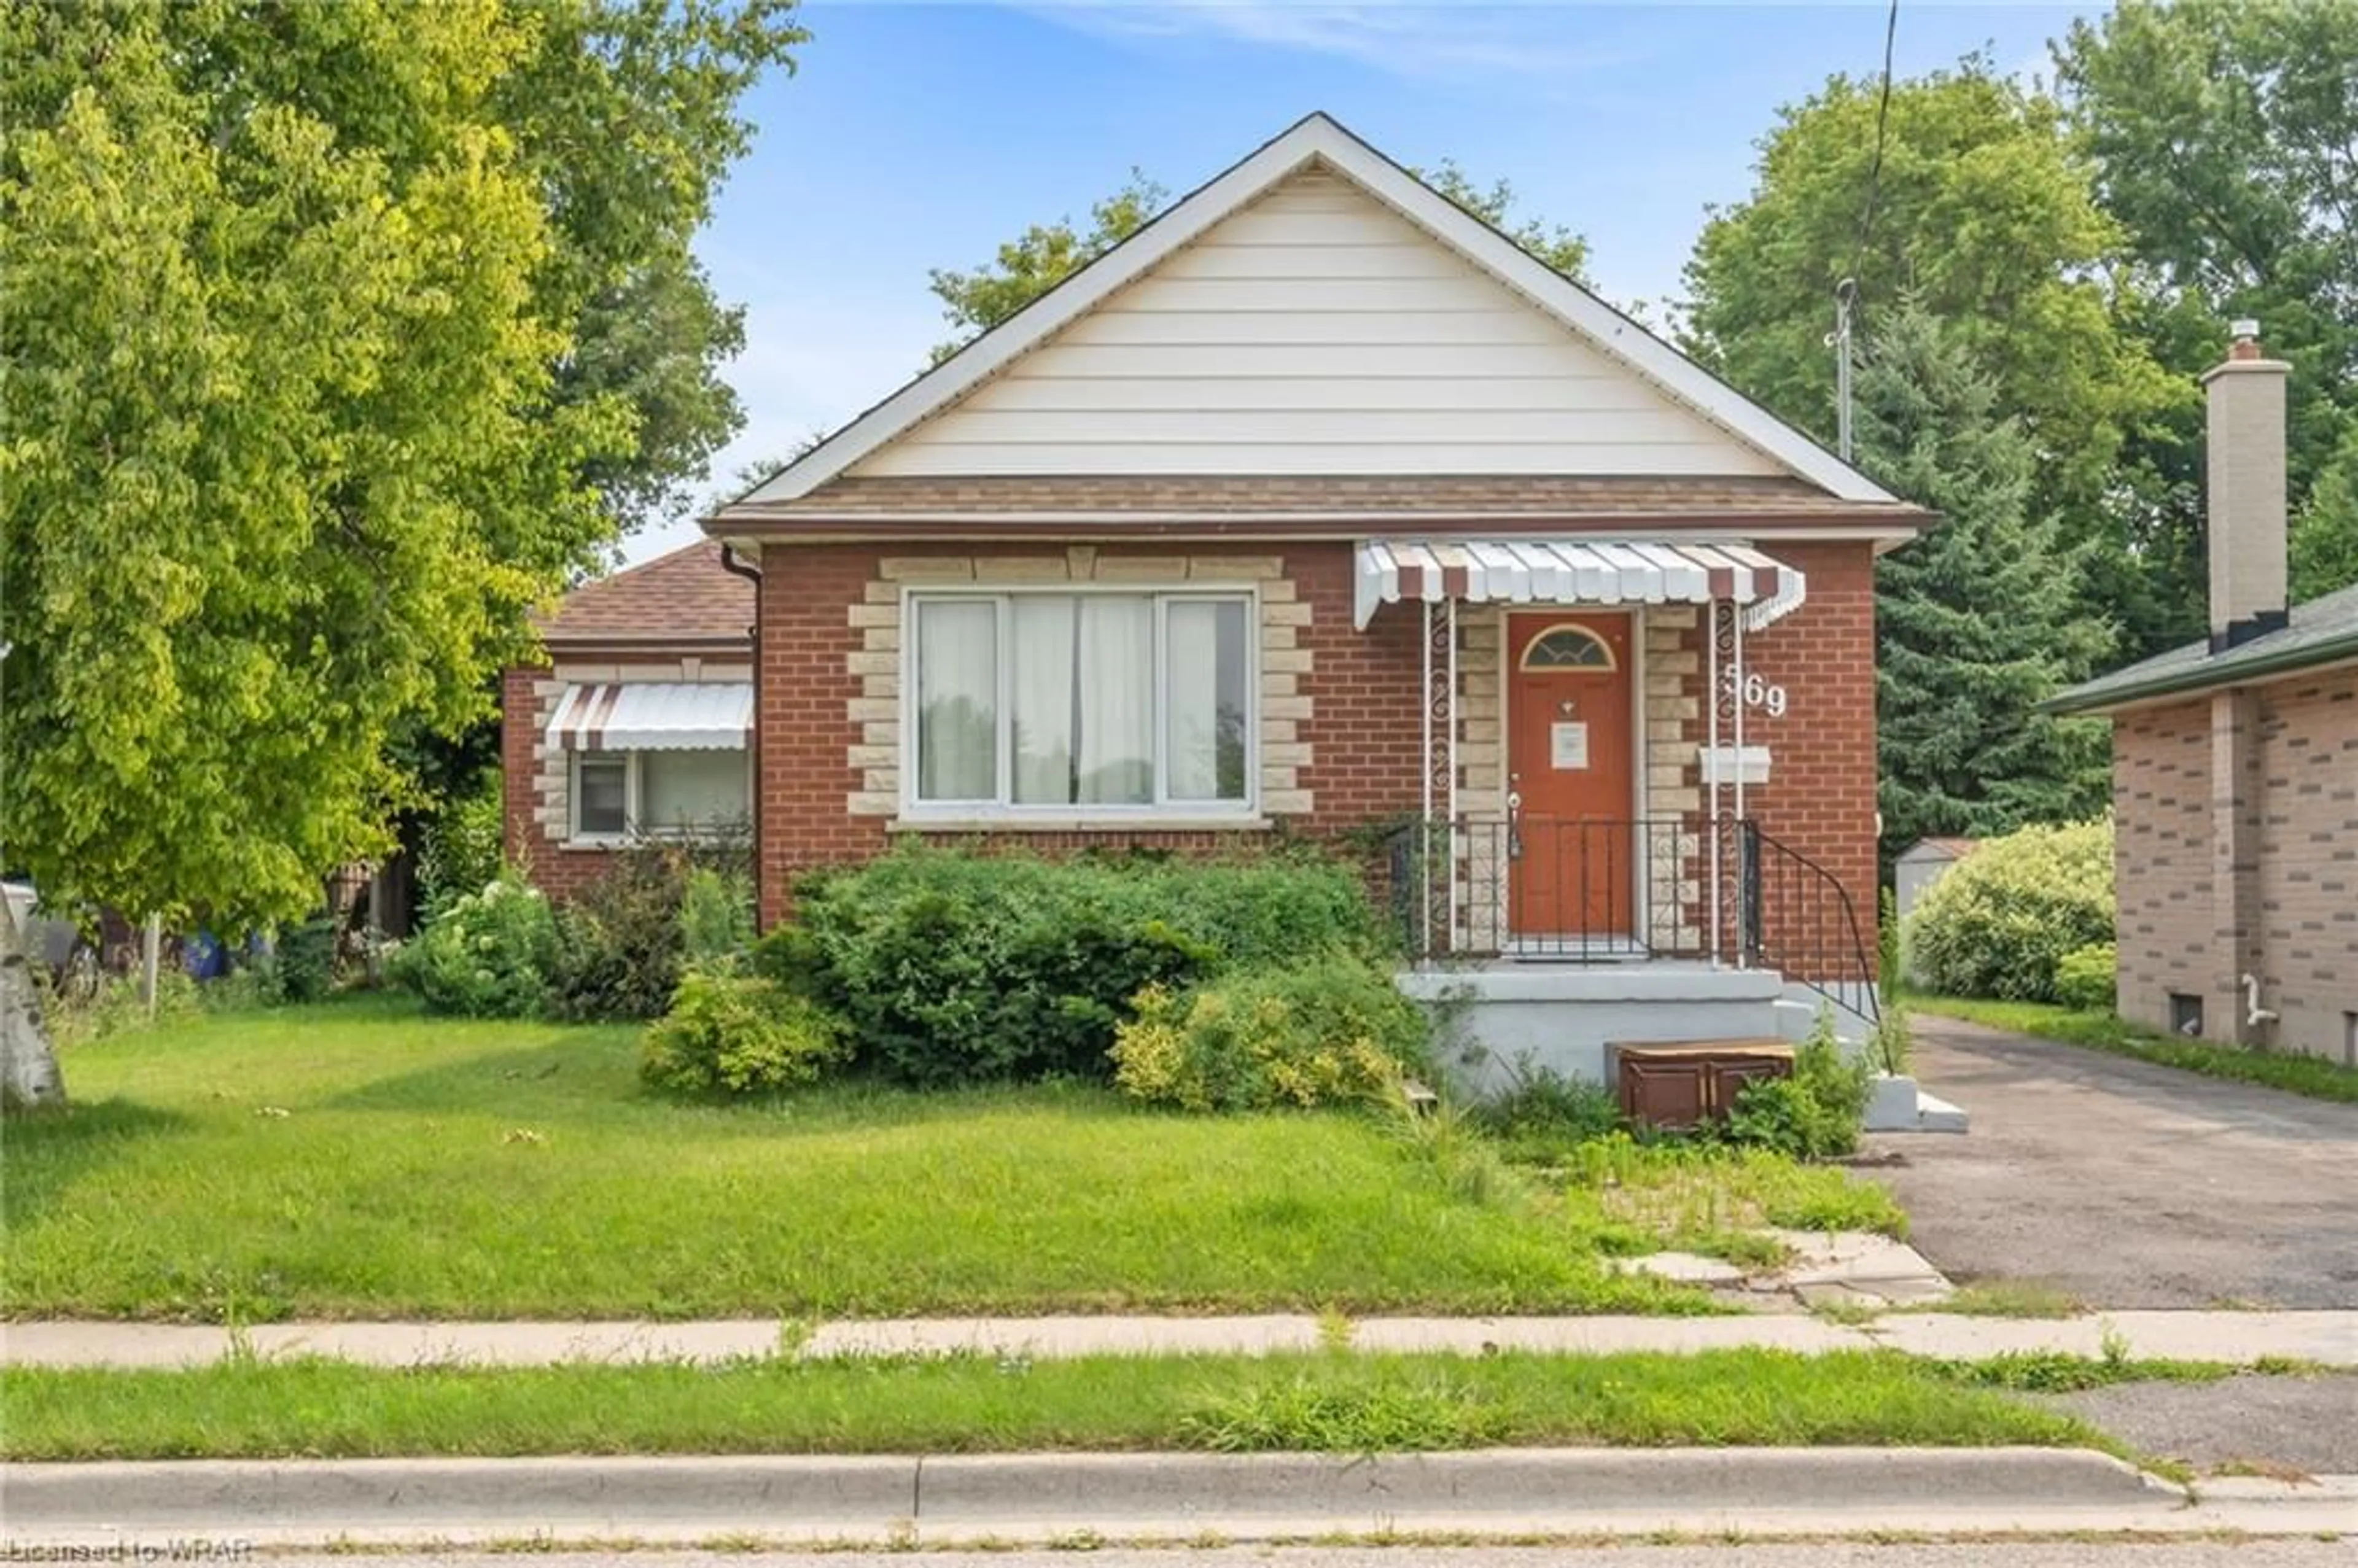 Home with brick exterior material for 569 Howard St, Oshawa Ontario L1H 4Y9